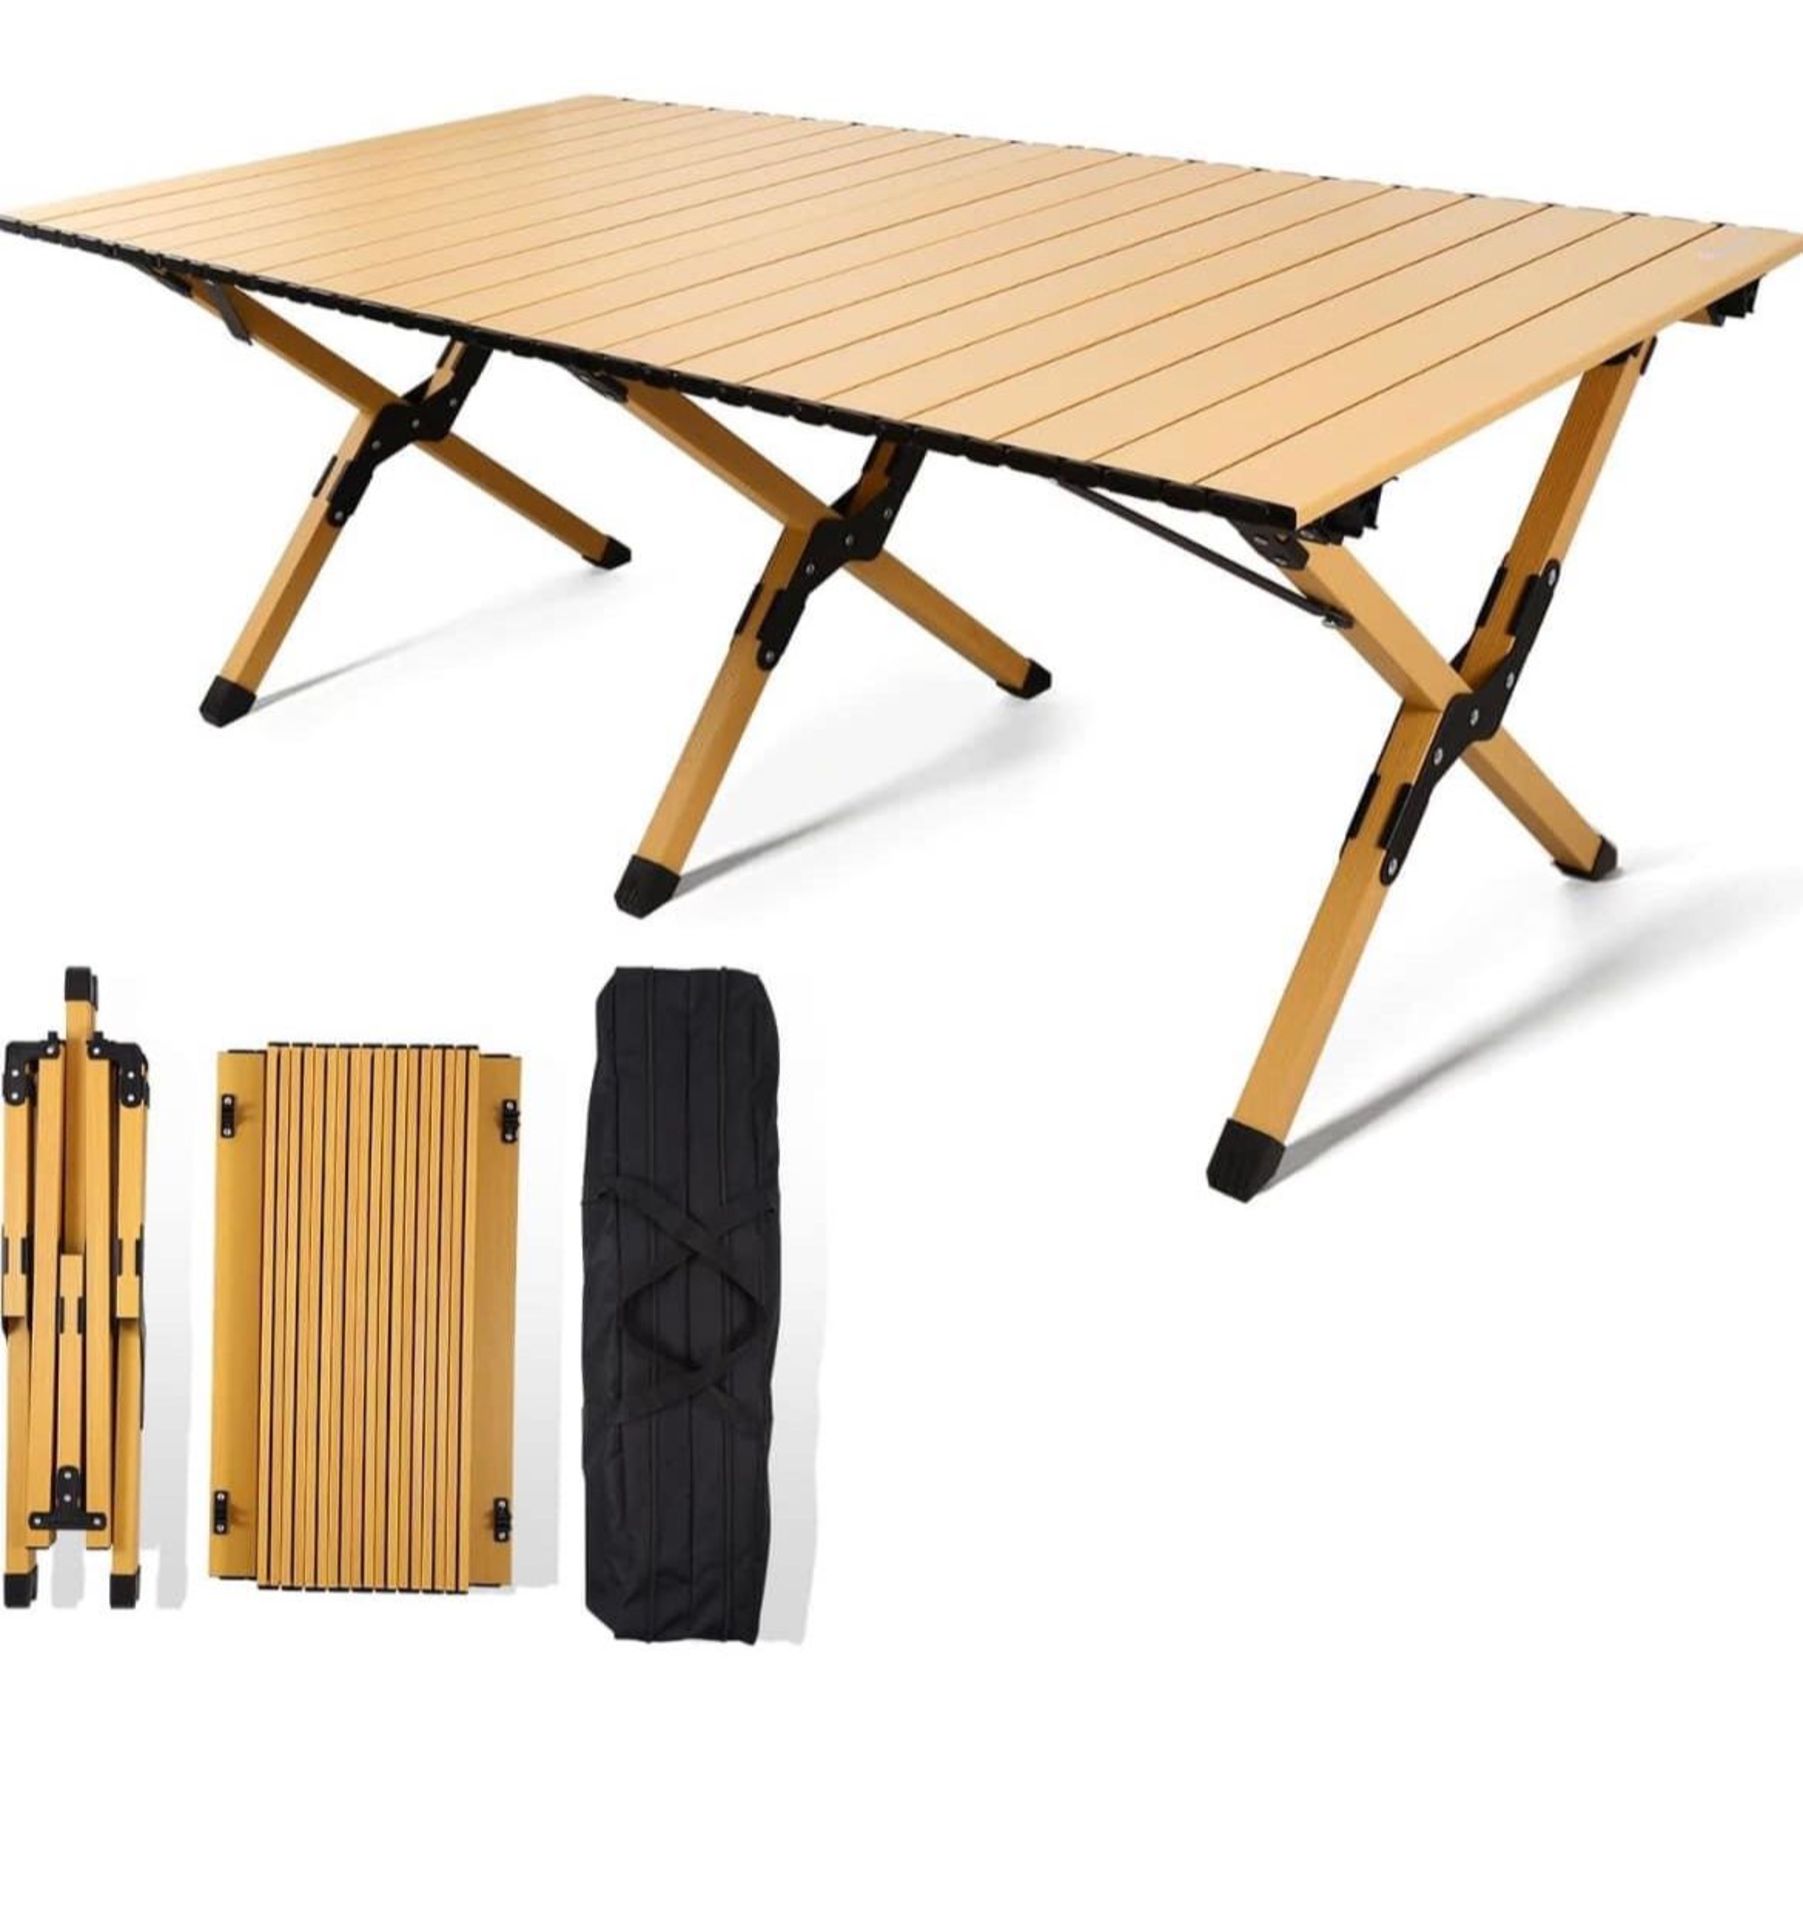 10 X BRAND NEW CAMPING TABLE